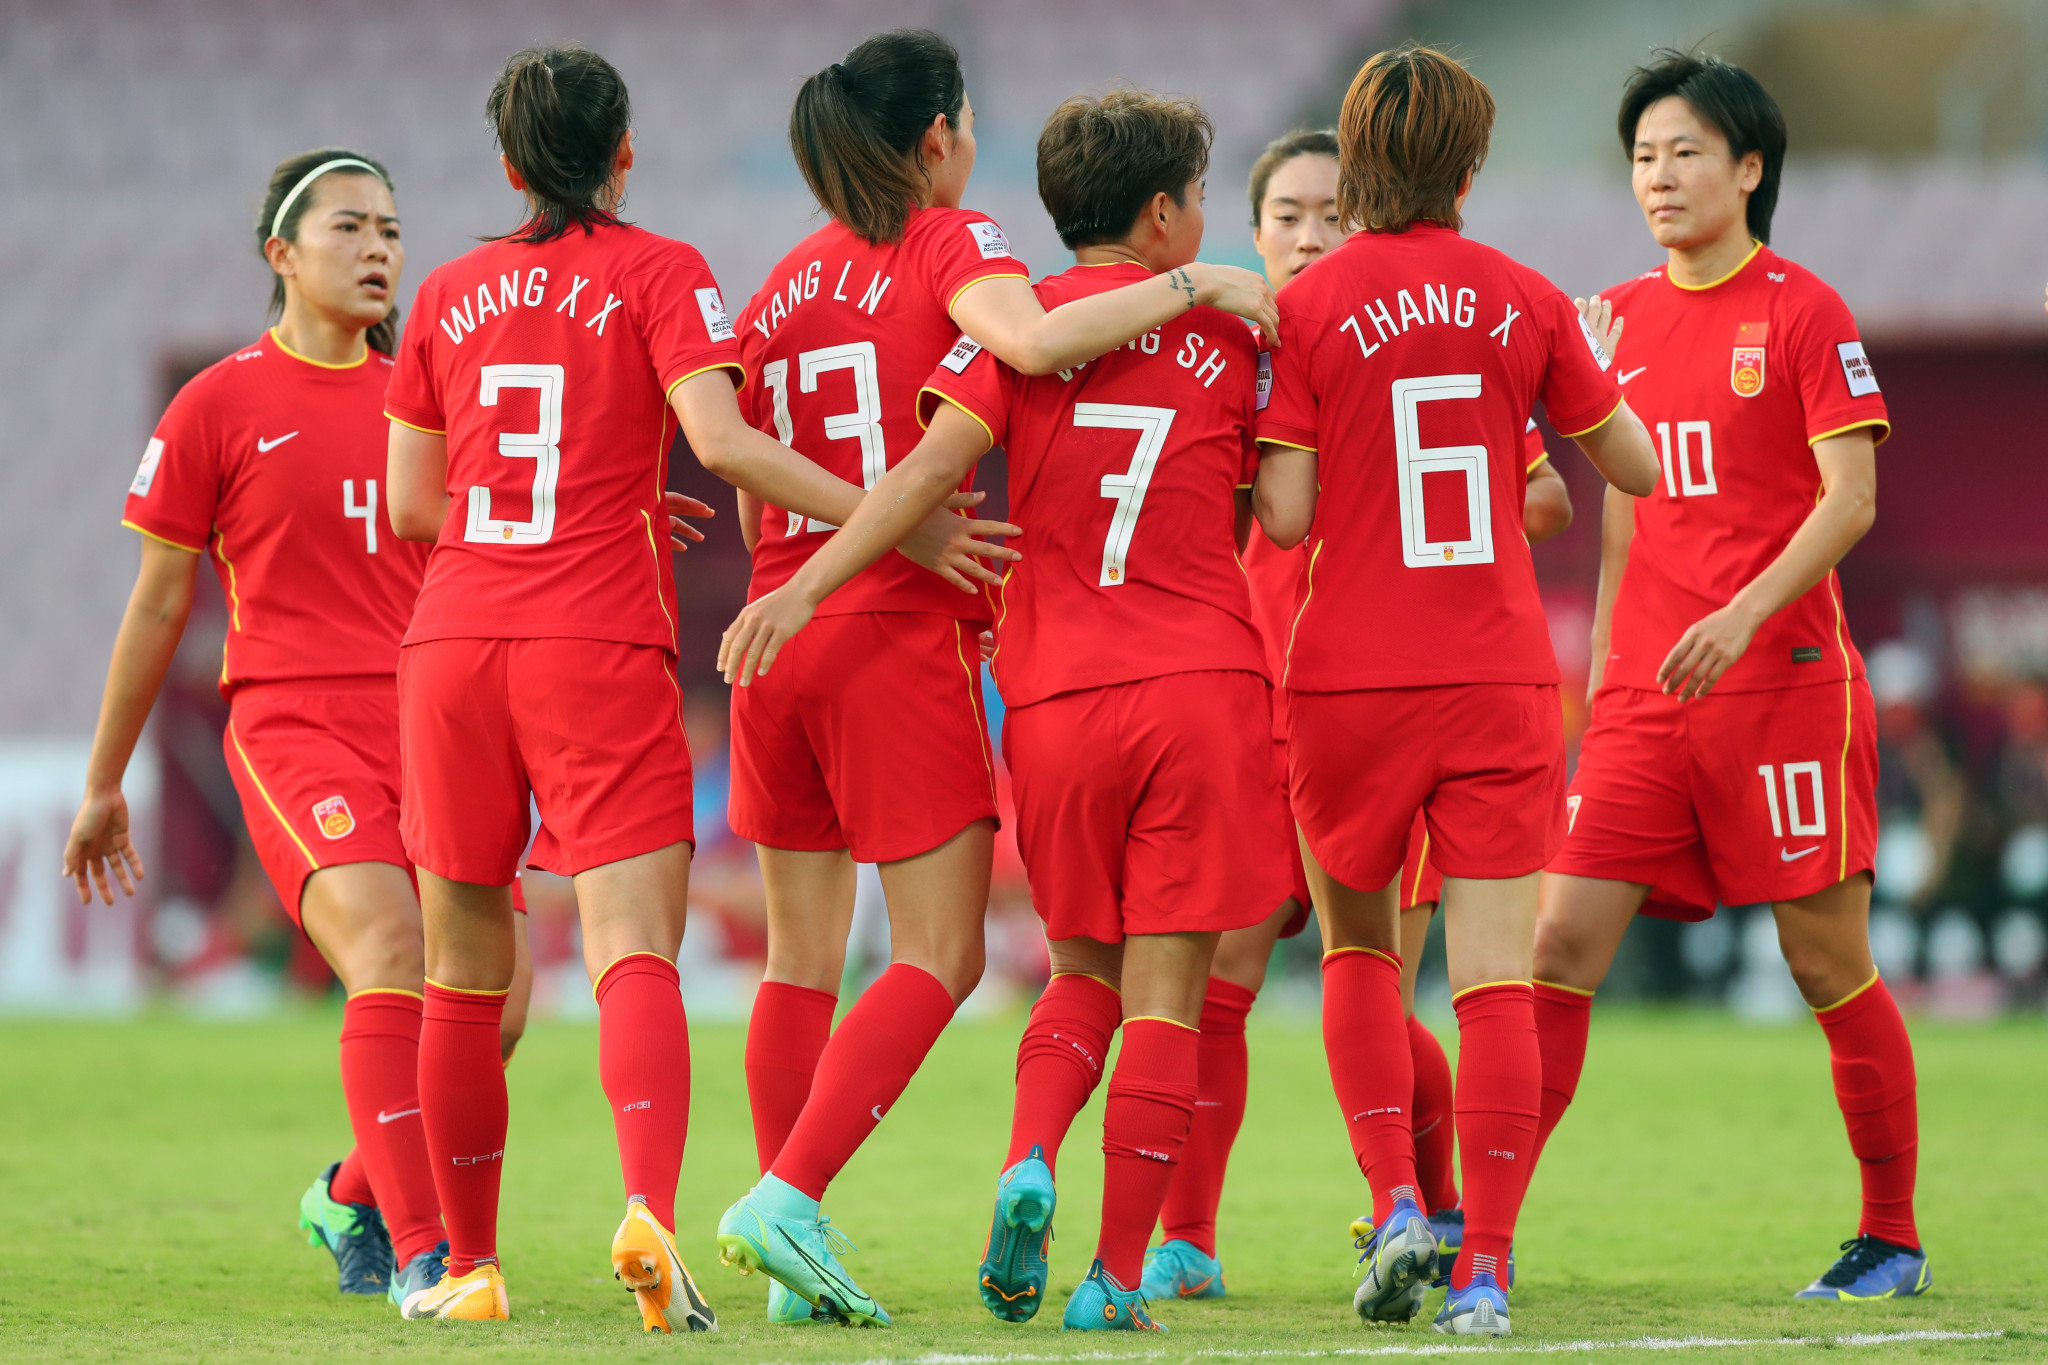 China came from behind to beat Vietnam 3-1 and reach a Women's Asian Cup semi-final against Japan ©Getty Images